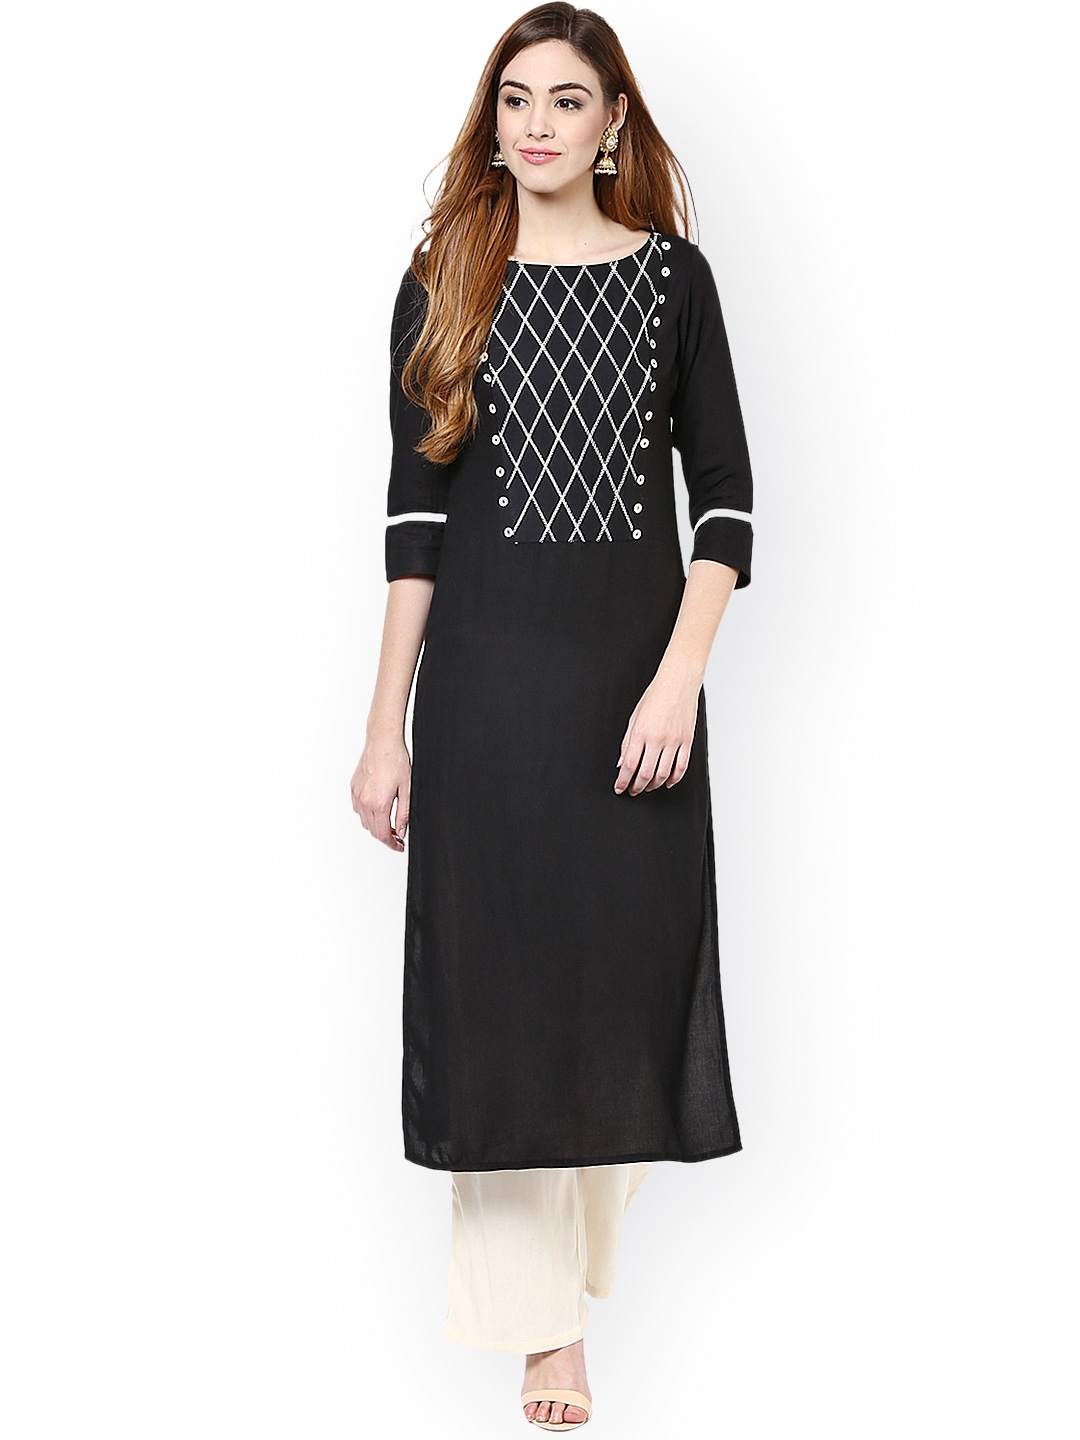 Update more than 92 black and white kurti myntra best